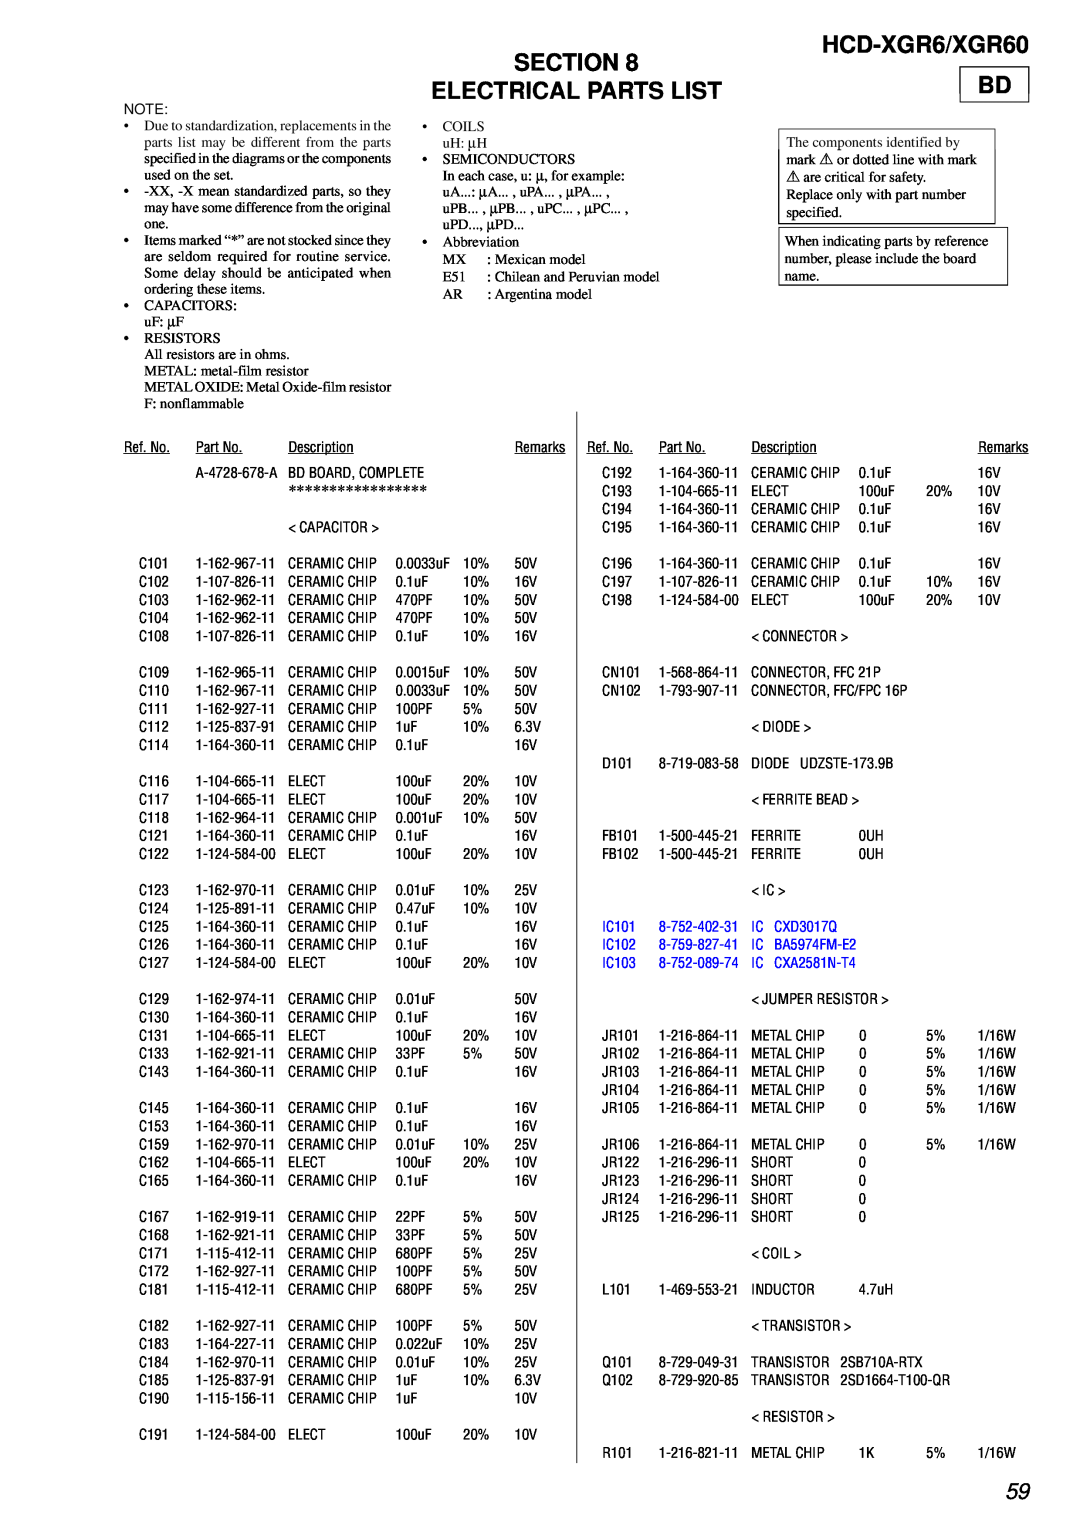 Sony HCD-XGR60 specifications Section Electrical Parts List, HCD-XGR6/XGR60 BD, CXD3017Q 